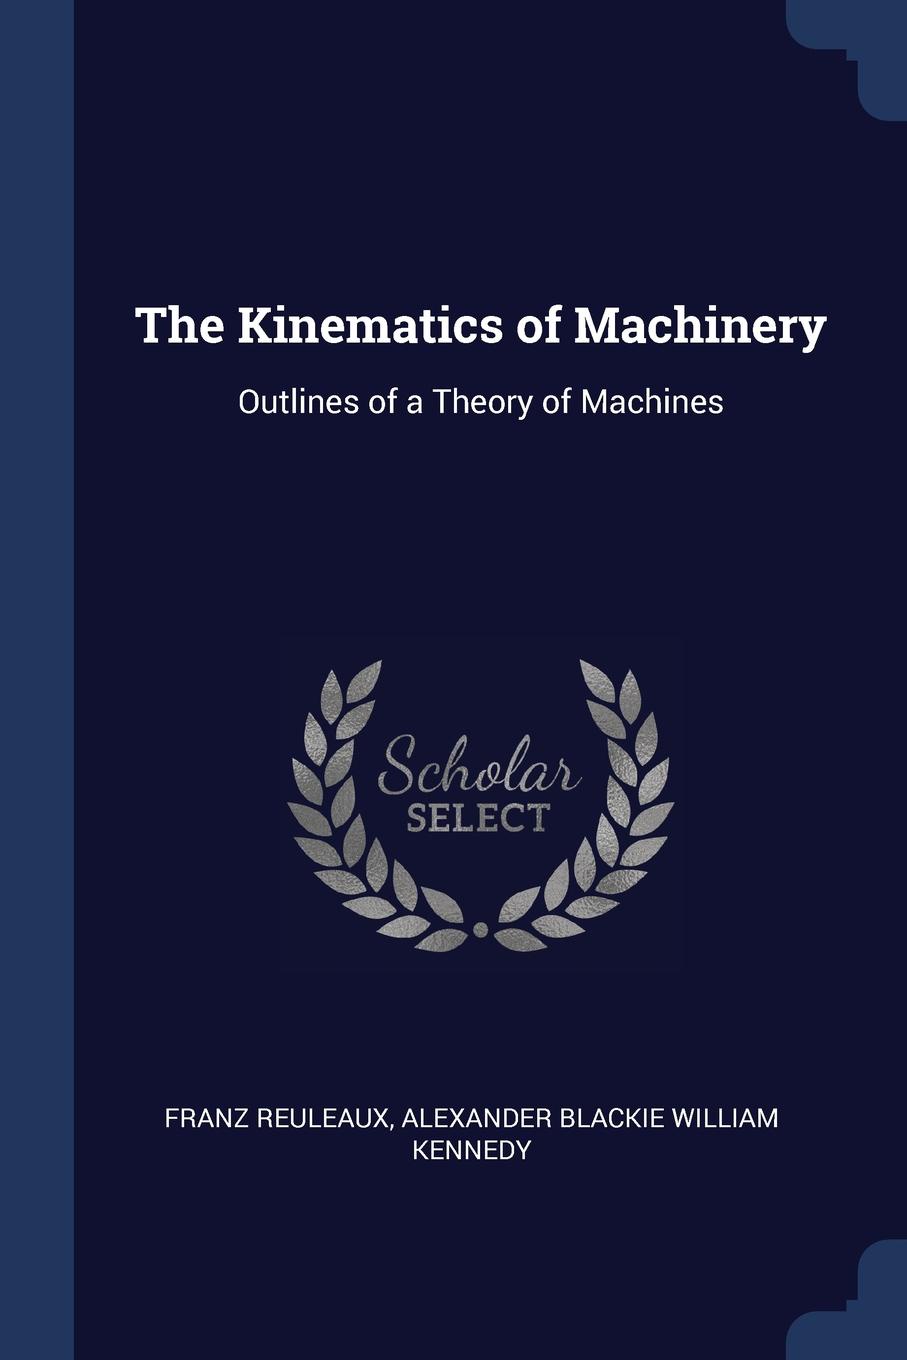 The Kinematics of Machinery. Outlines of a Theory of Machines